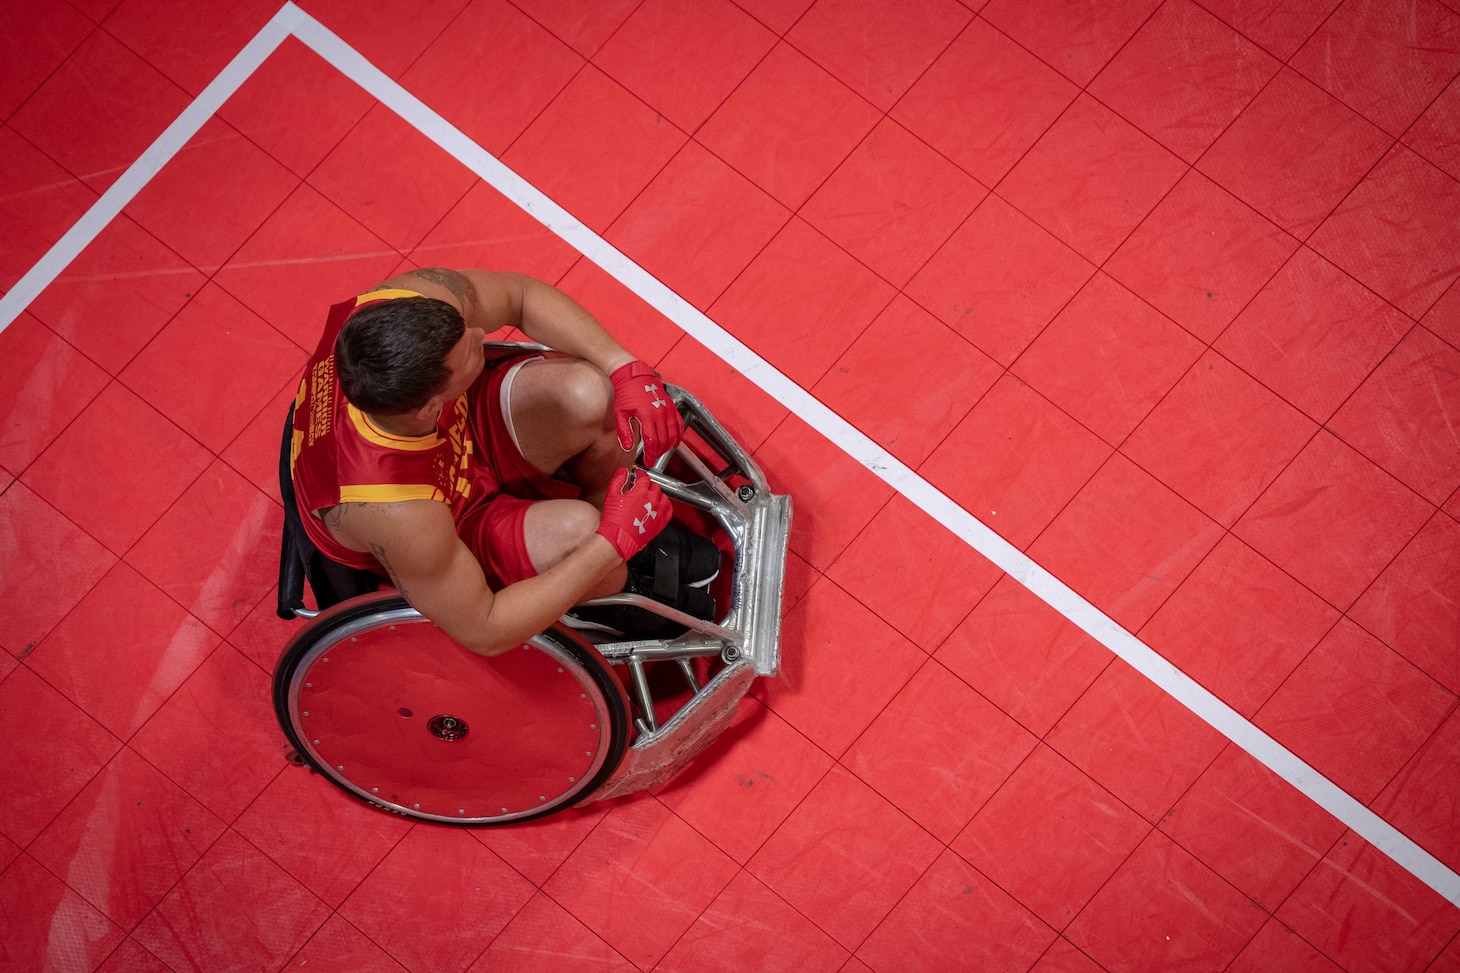 Overhead photo of a Wounded Warrior prepares for a wheelchair rugby match during the 2019 DoD Warrior Games in Tampa, Florida.